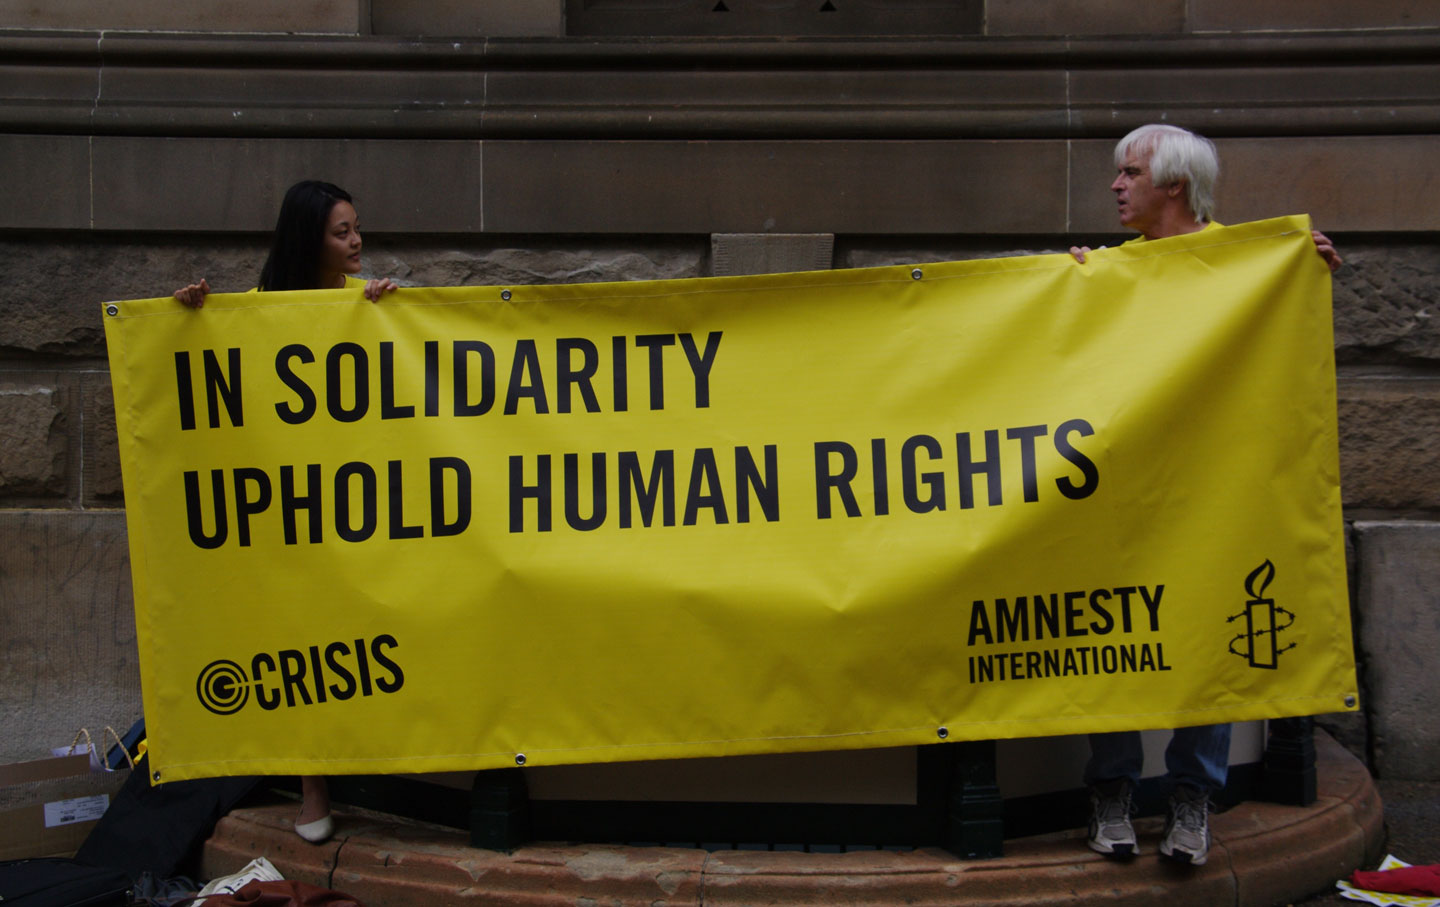 Amnesty International’s Long-Due Support for Sex Workers Rights